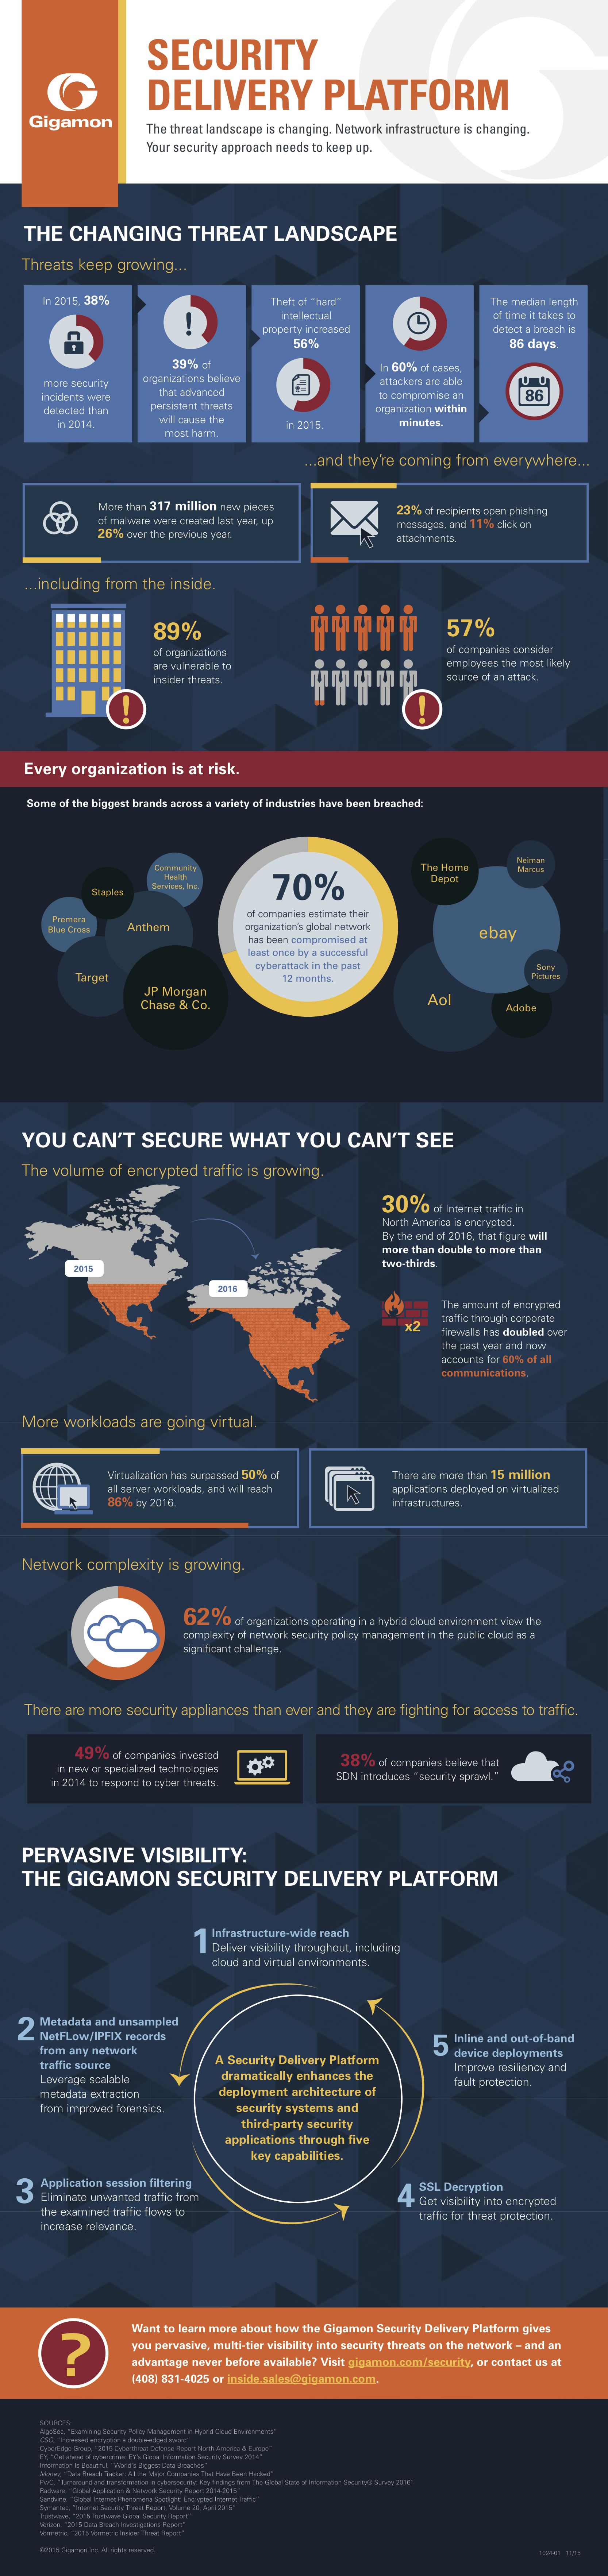 Infographic from Gigamon on the changing security threats, network security infrastructure and the need for a security delivery platform.